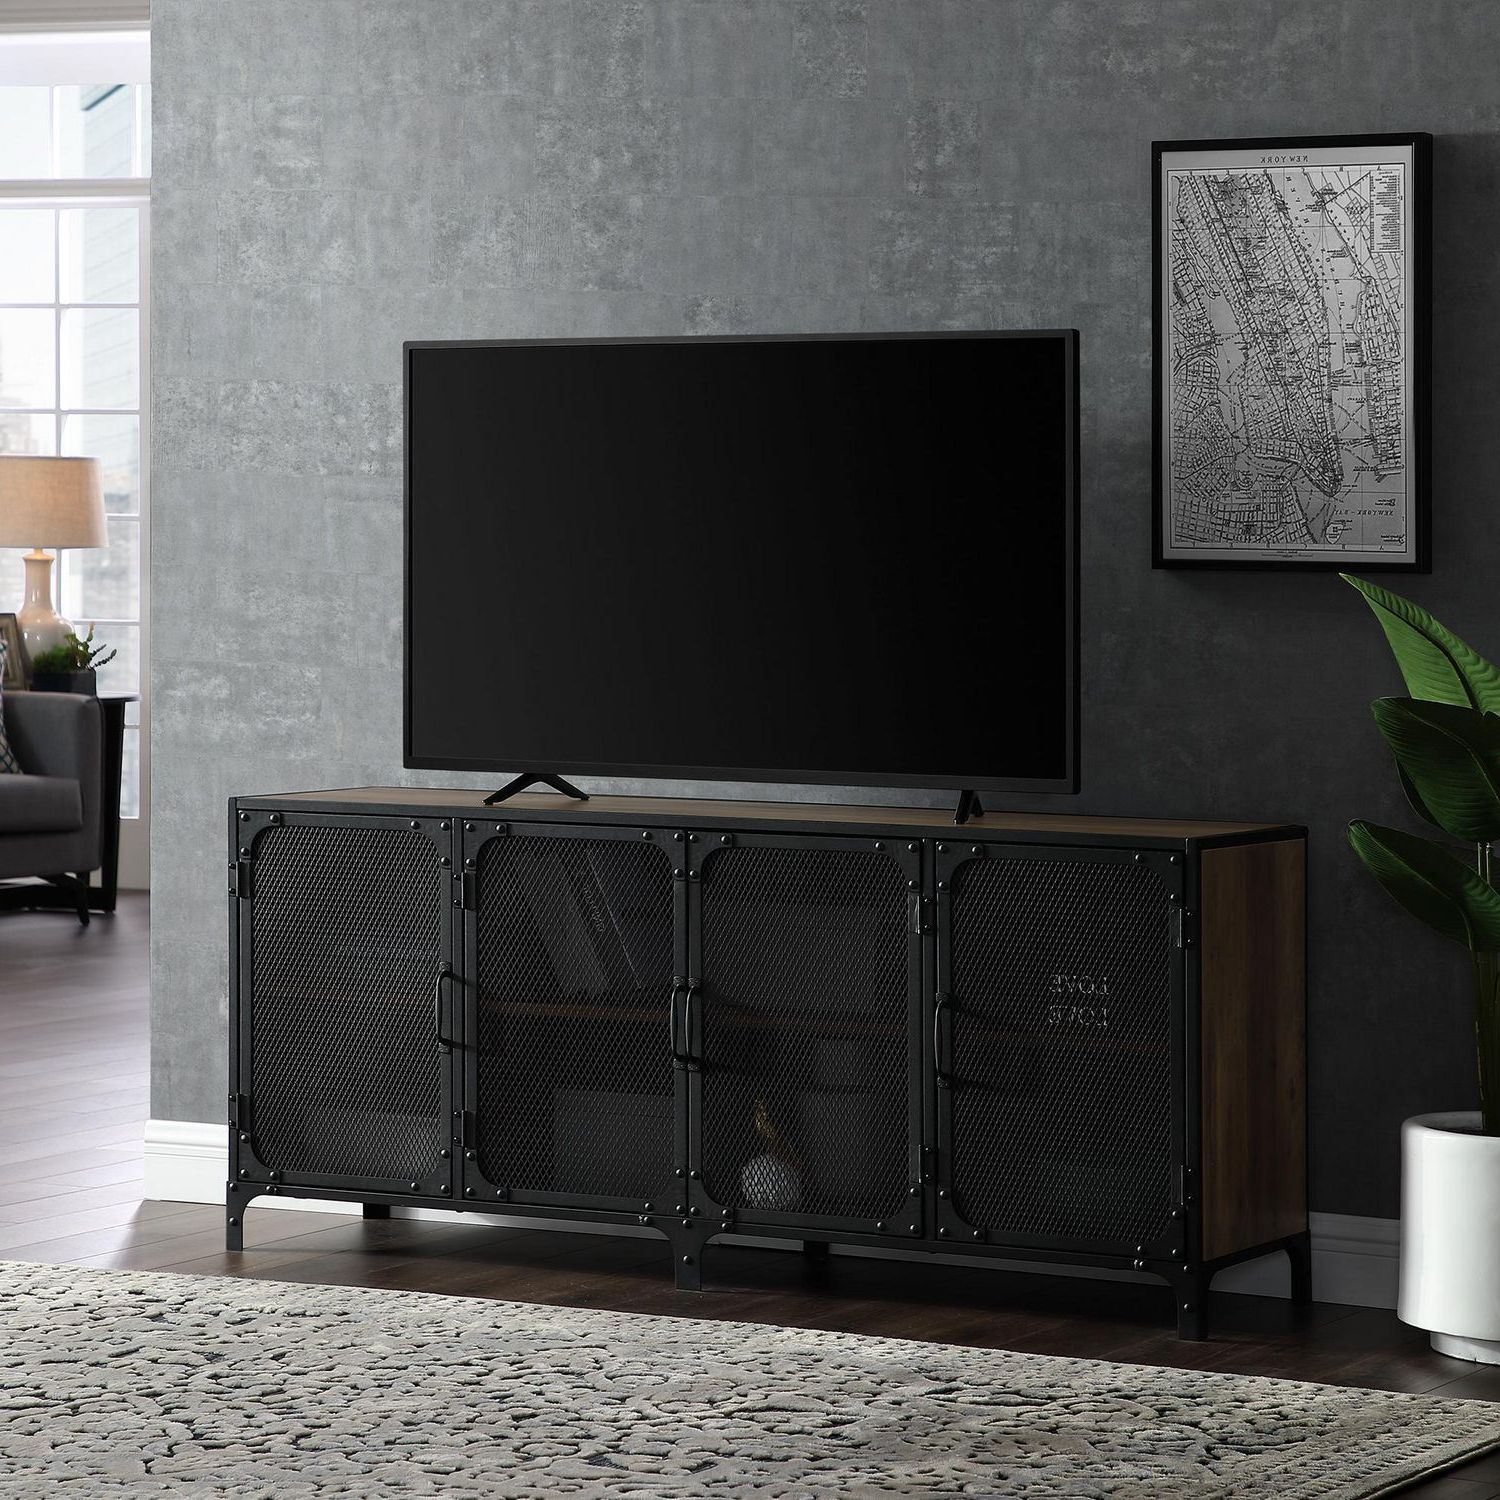 Manor Park Industrial Mesh Tv Stand For Tv's Up To 66 Throughout Urban Rustic Tv Stands (View 3 of 20)